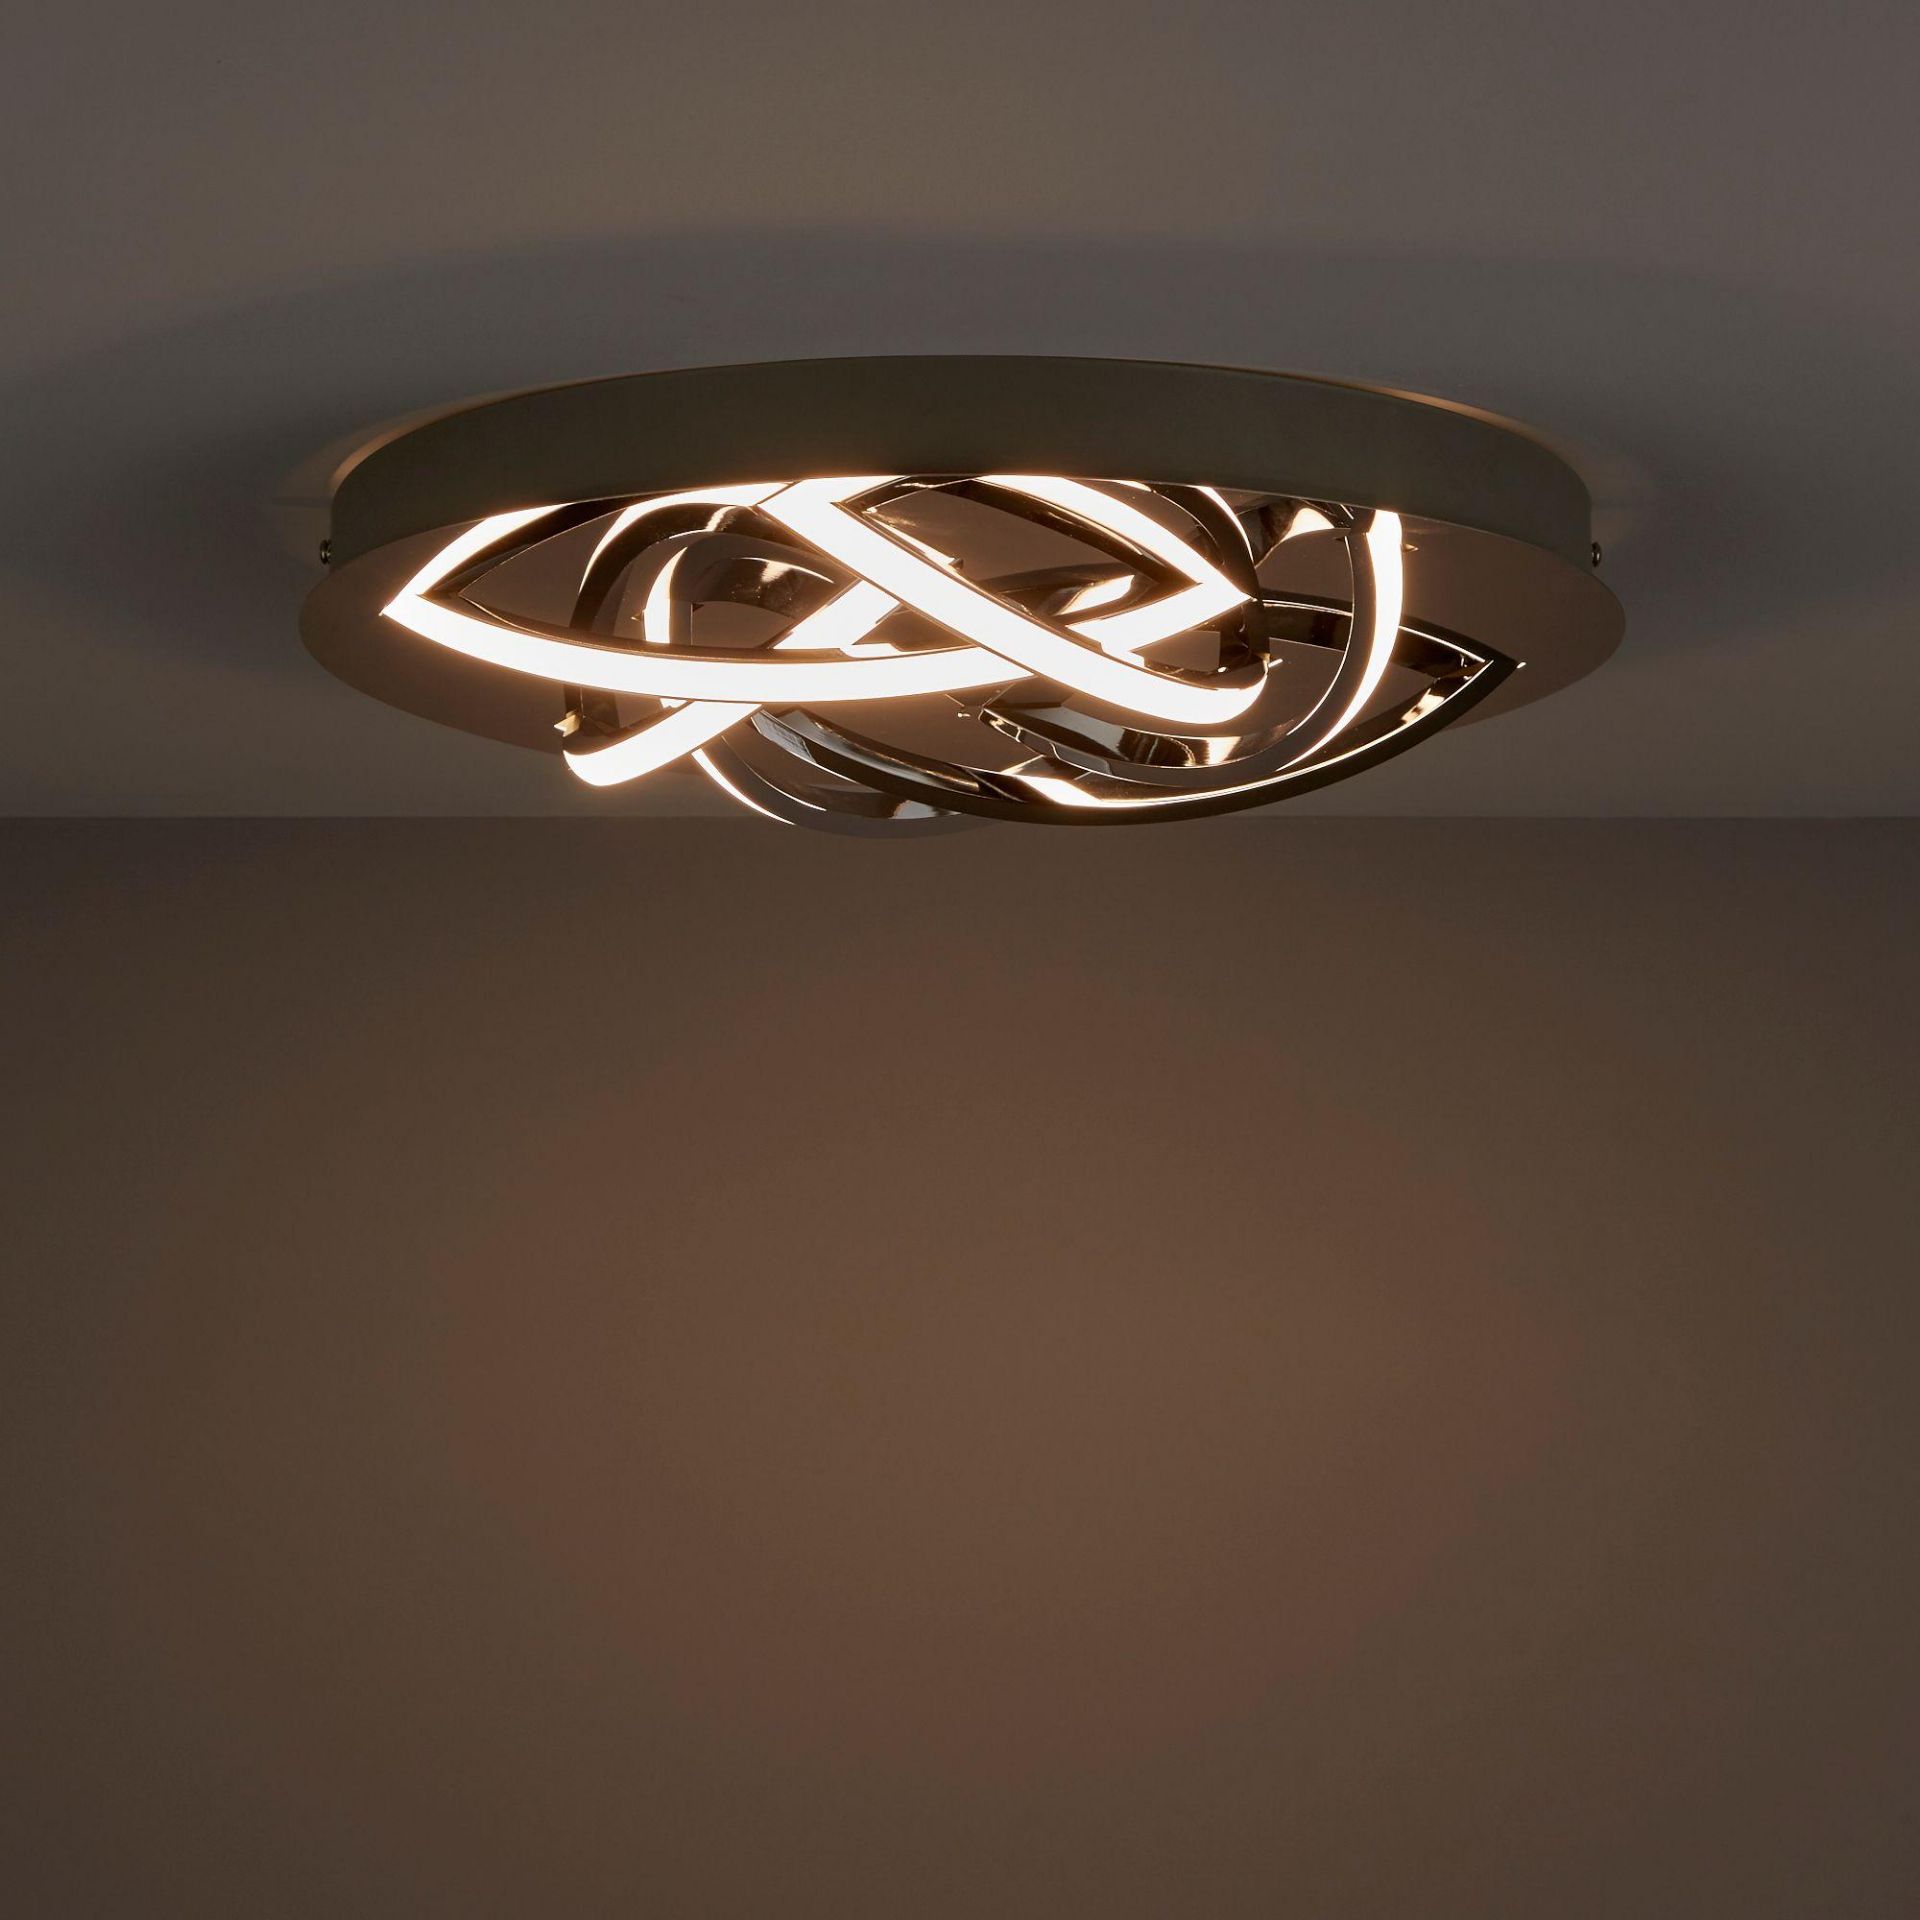 (XX106) ORCUS CHROME EFFECT 6 LAMP CEILING LIGHT. This Orcus ceiling light fitting has a modern... - Image 2 of 4